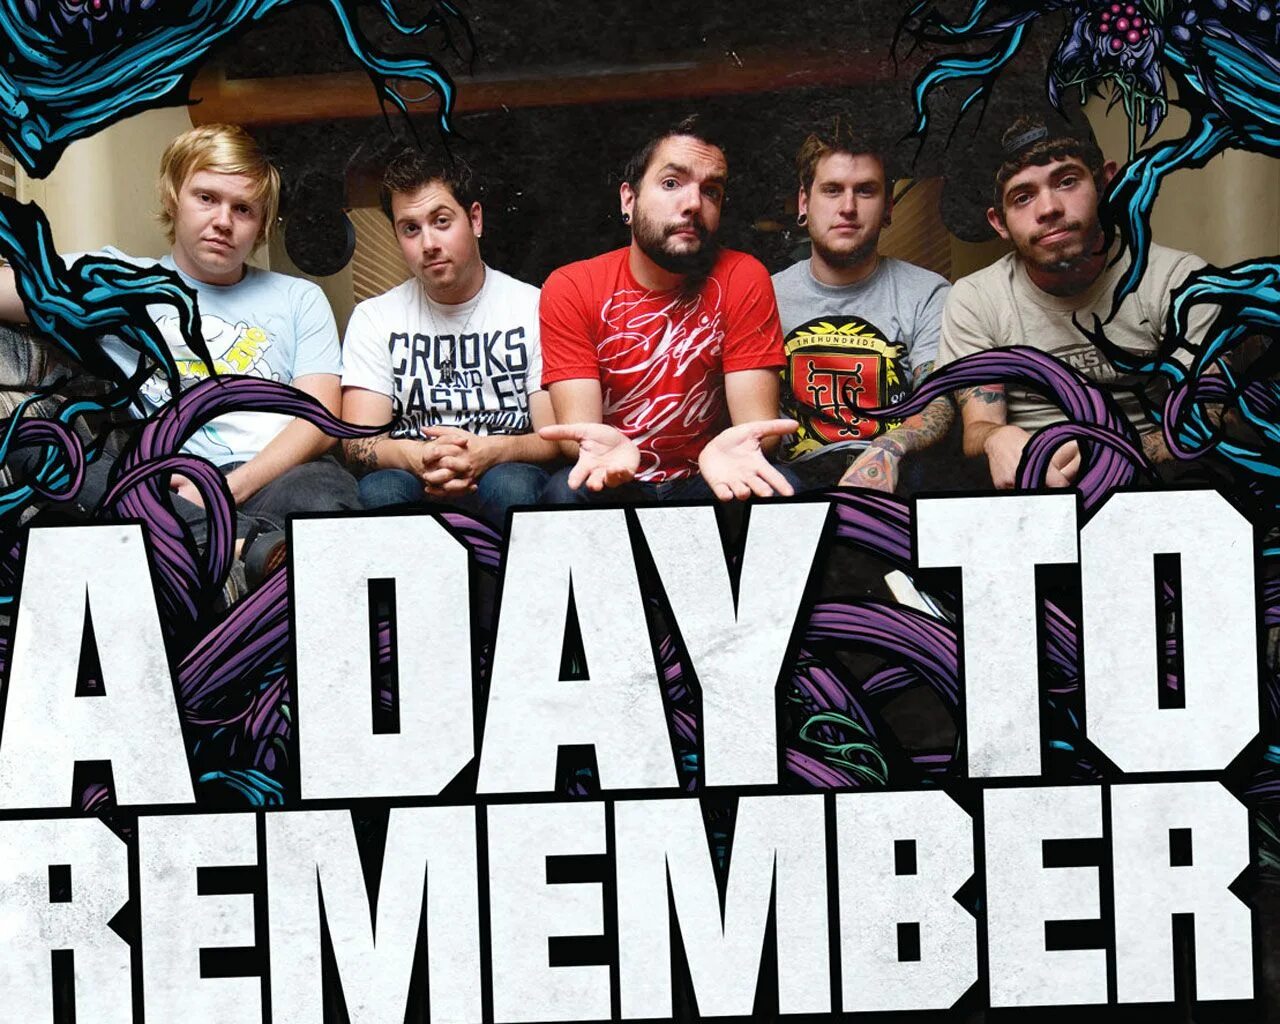 A Day to remember. Remember группа. A Day to remember 2021. Плакат группы a Day to remember. A year to remember